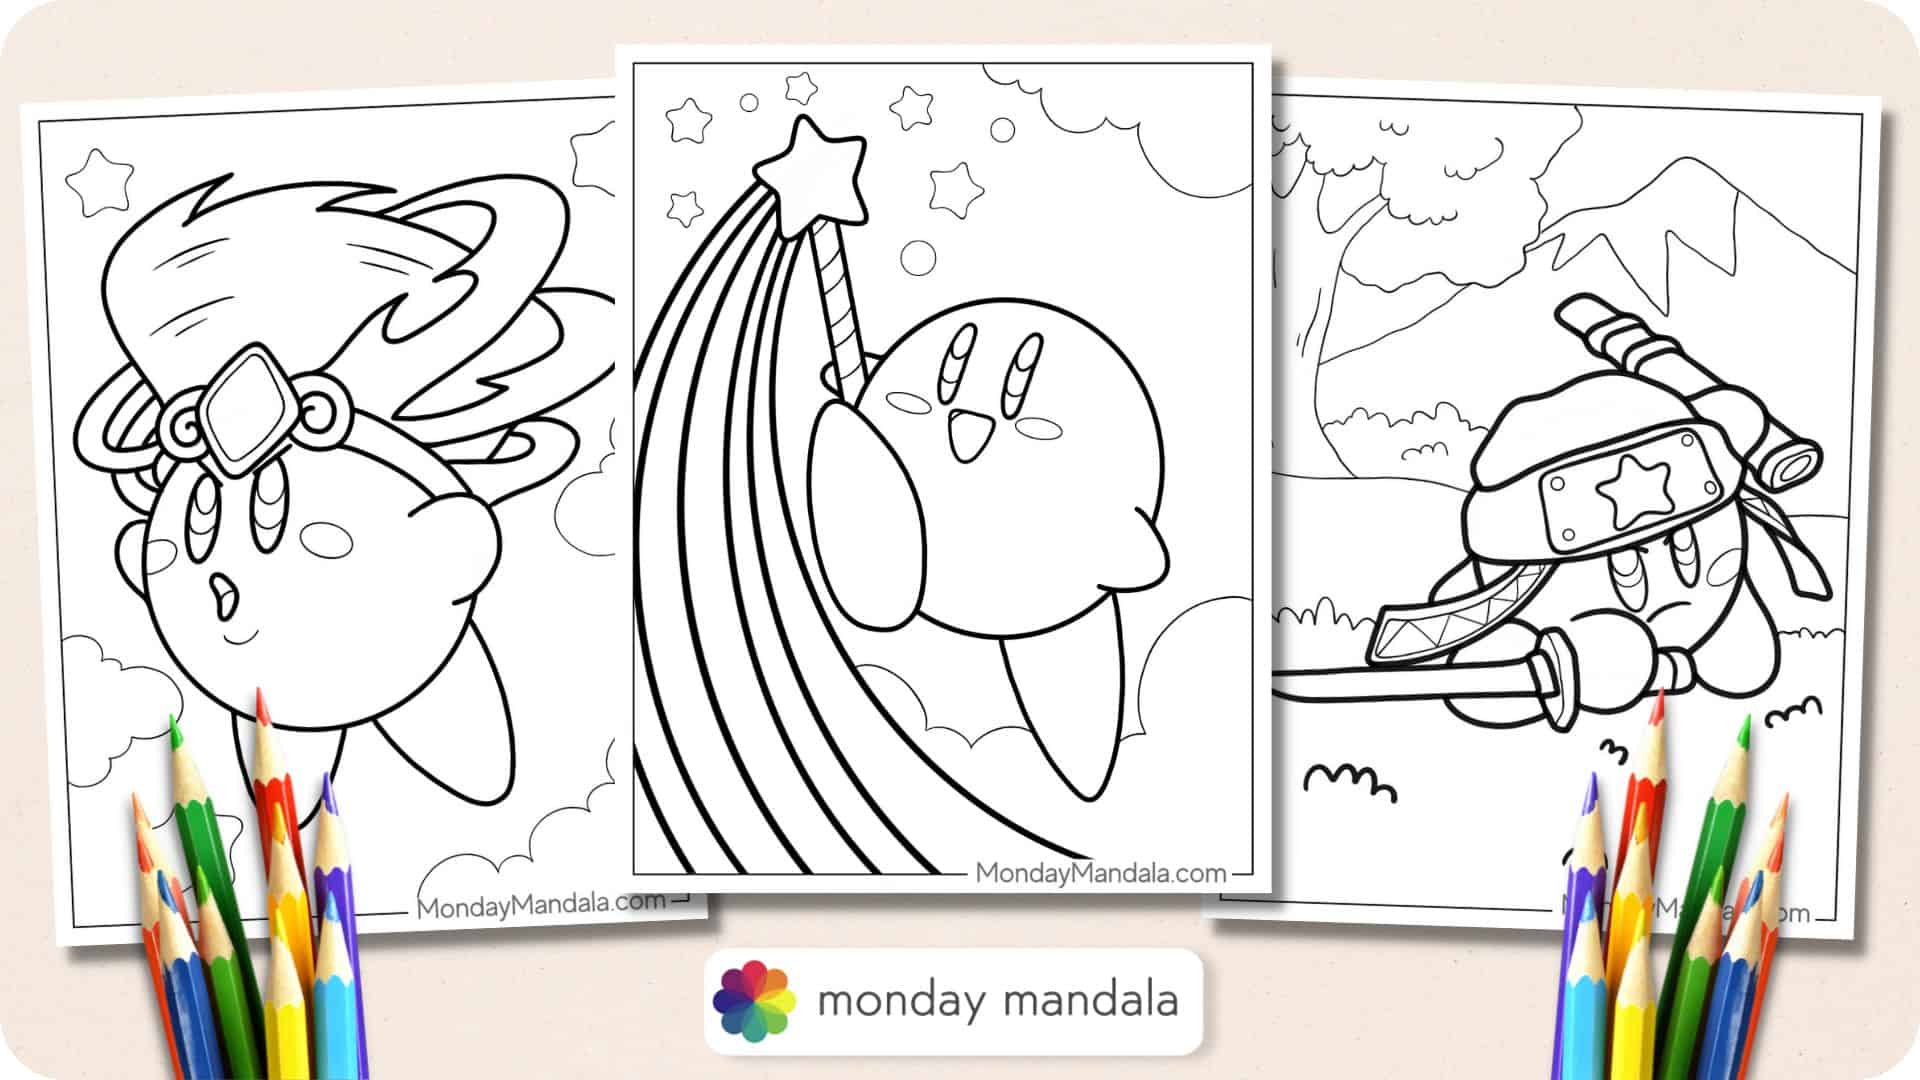 Kirby coloring pages free pdf printables